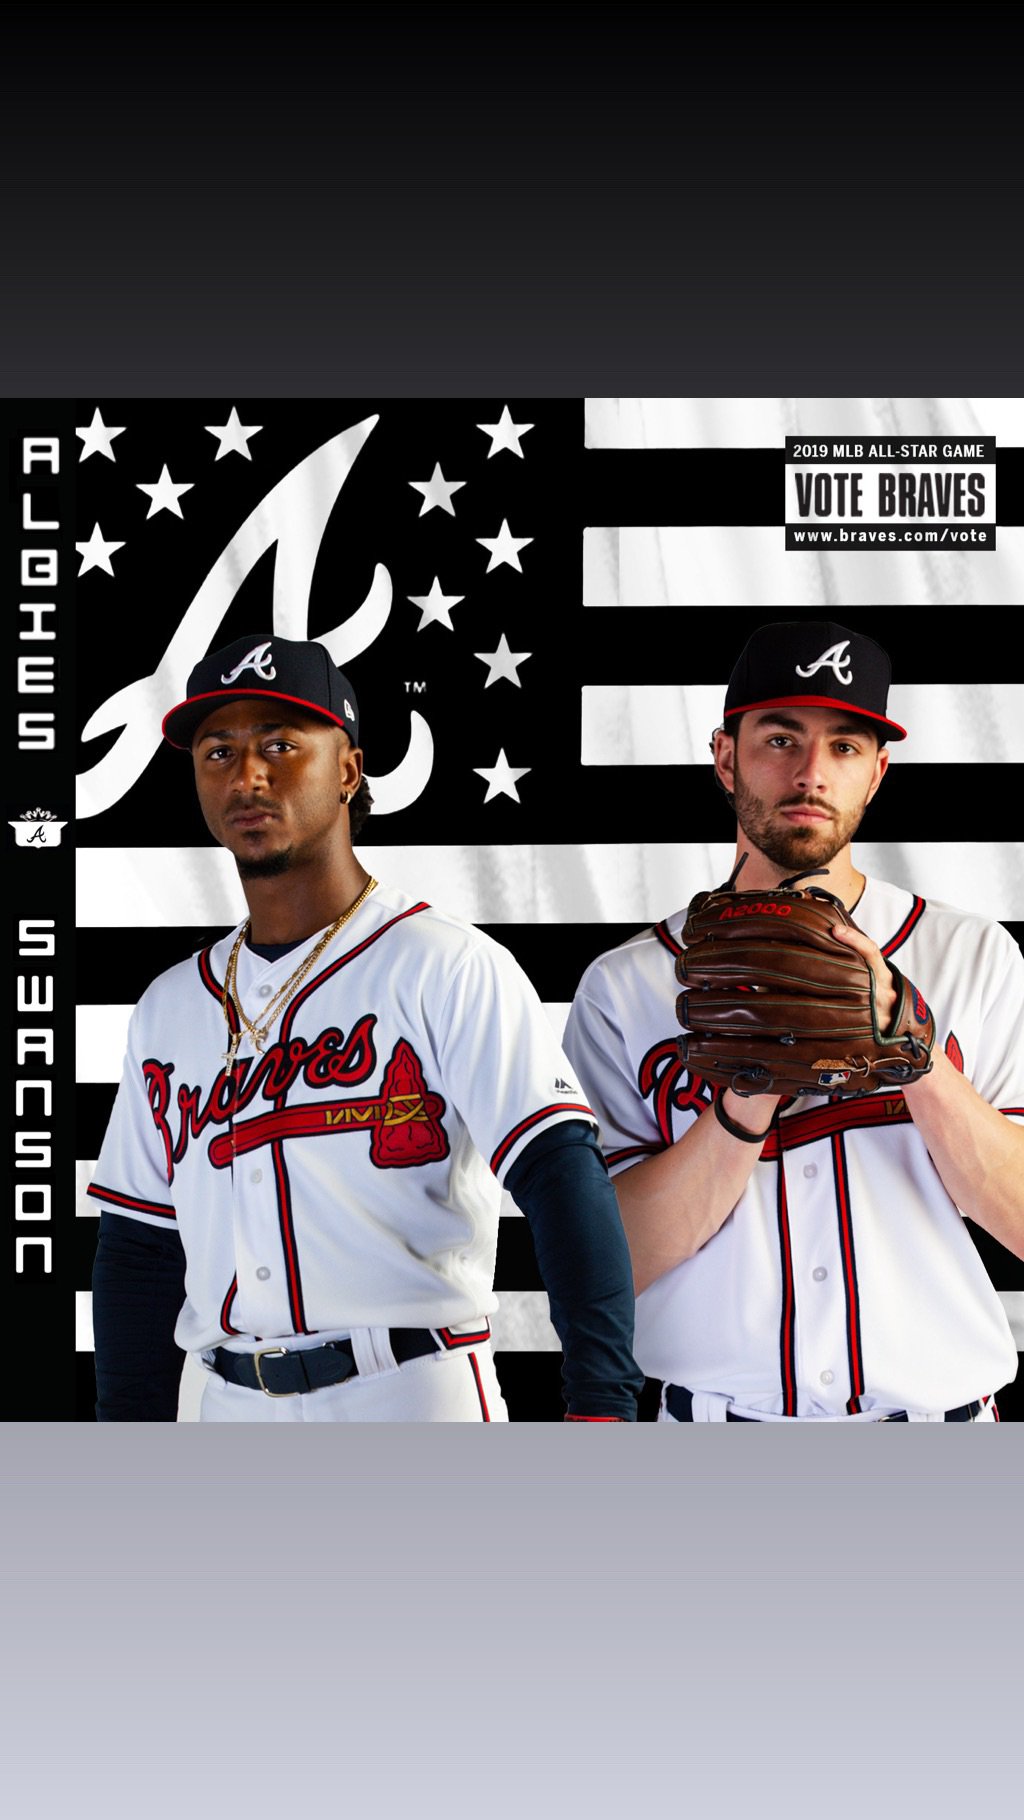 Big Boi on X: Support our Atlanta boys, Dansby Swanson and Ozzie